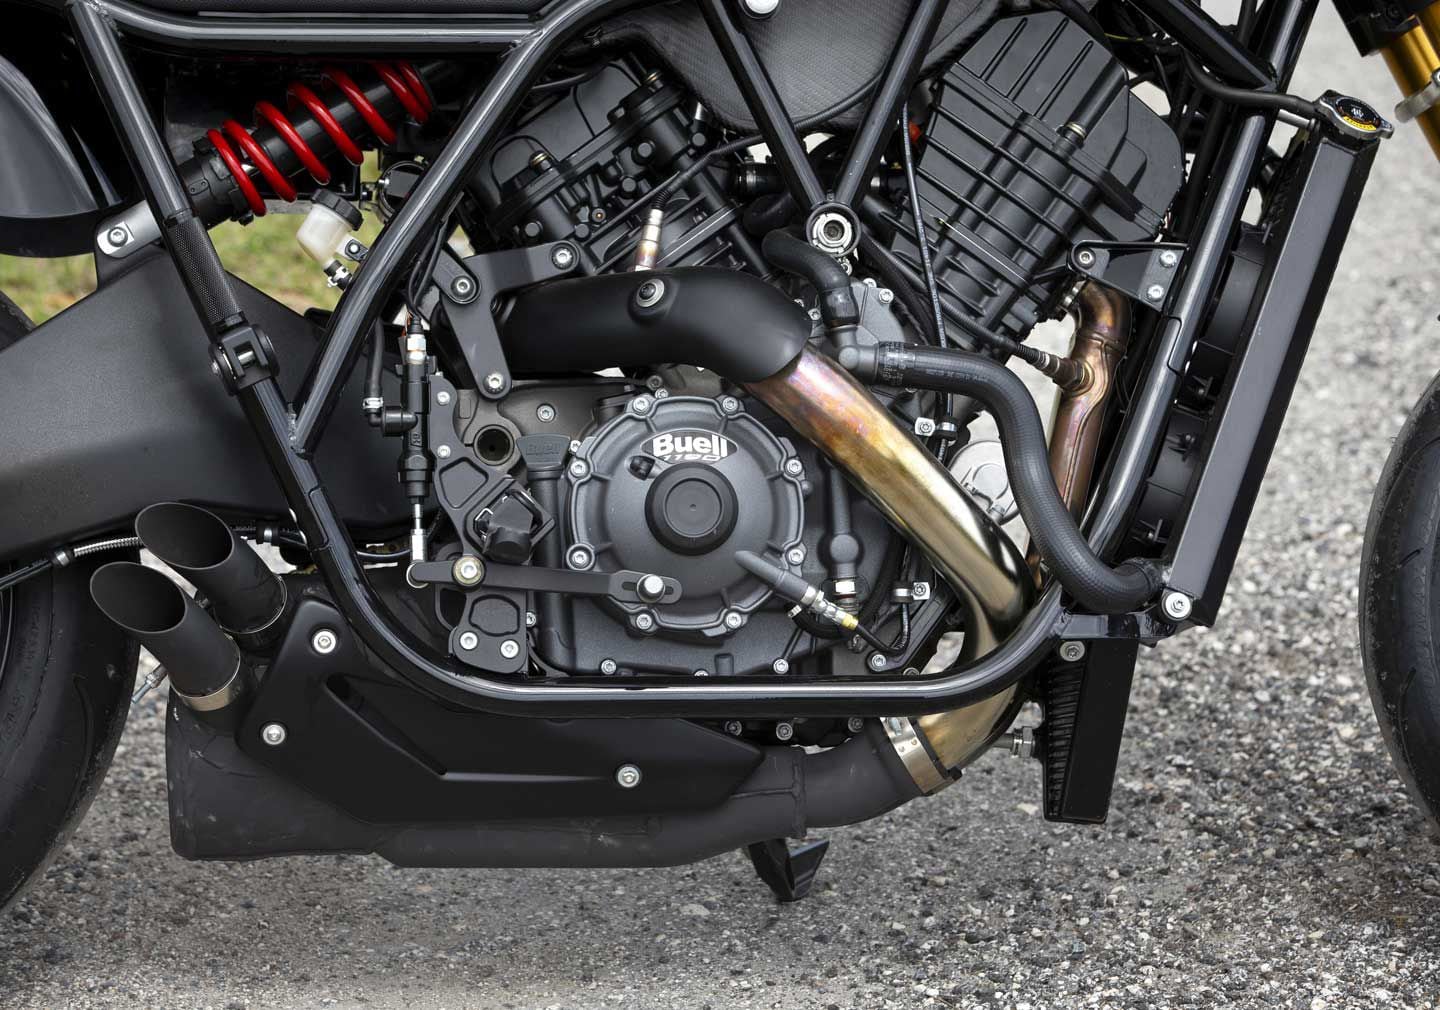 The Super Cruiser gets the same liquid-cooled 1,190cc ET-V2 V-twin as the 1190RX superbike with minor mods to the injectors and tune. The RSD-designed chassis rolls on 17-inch wheels.